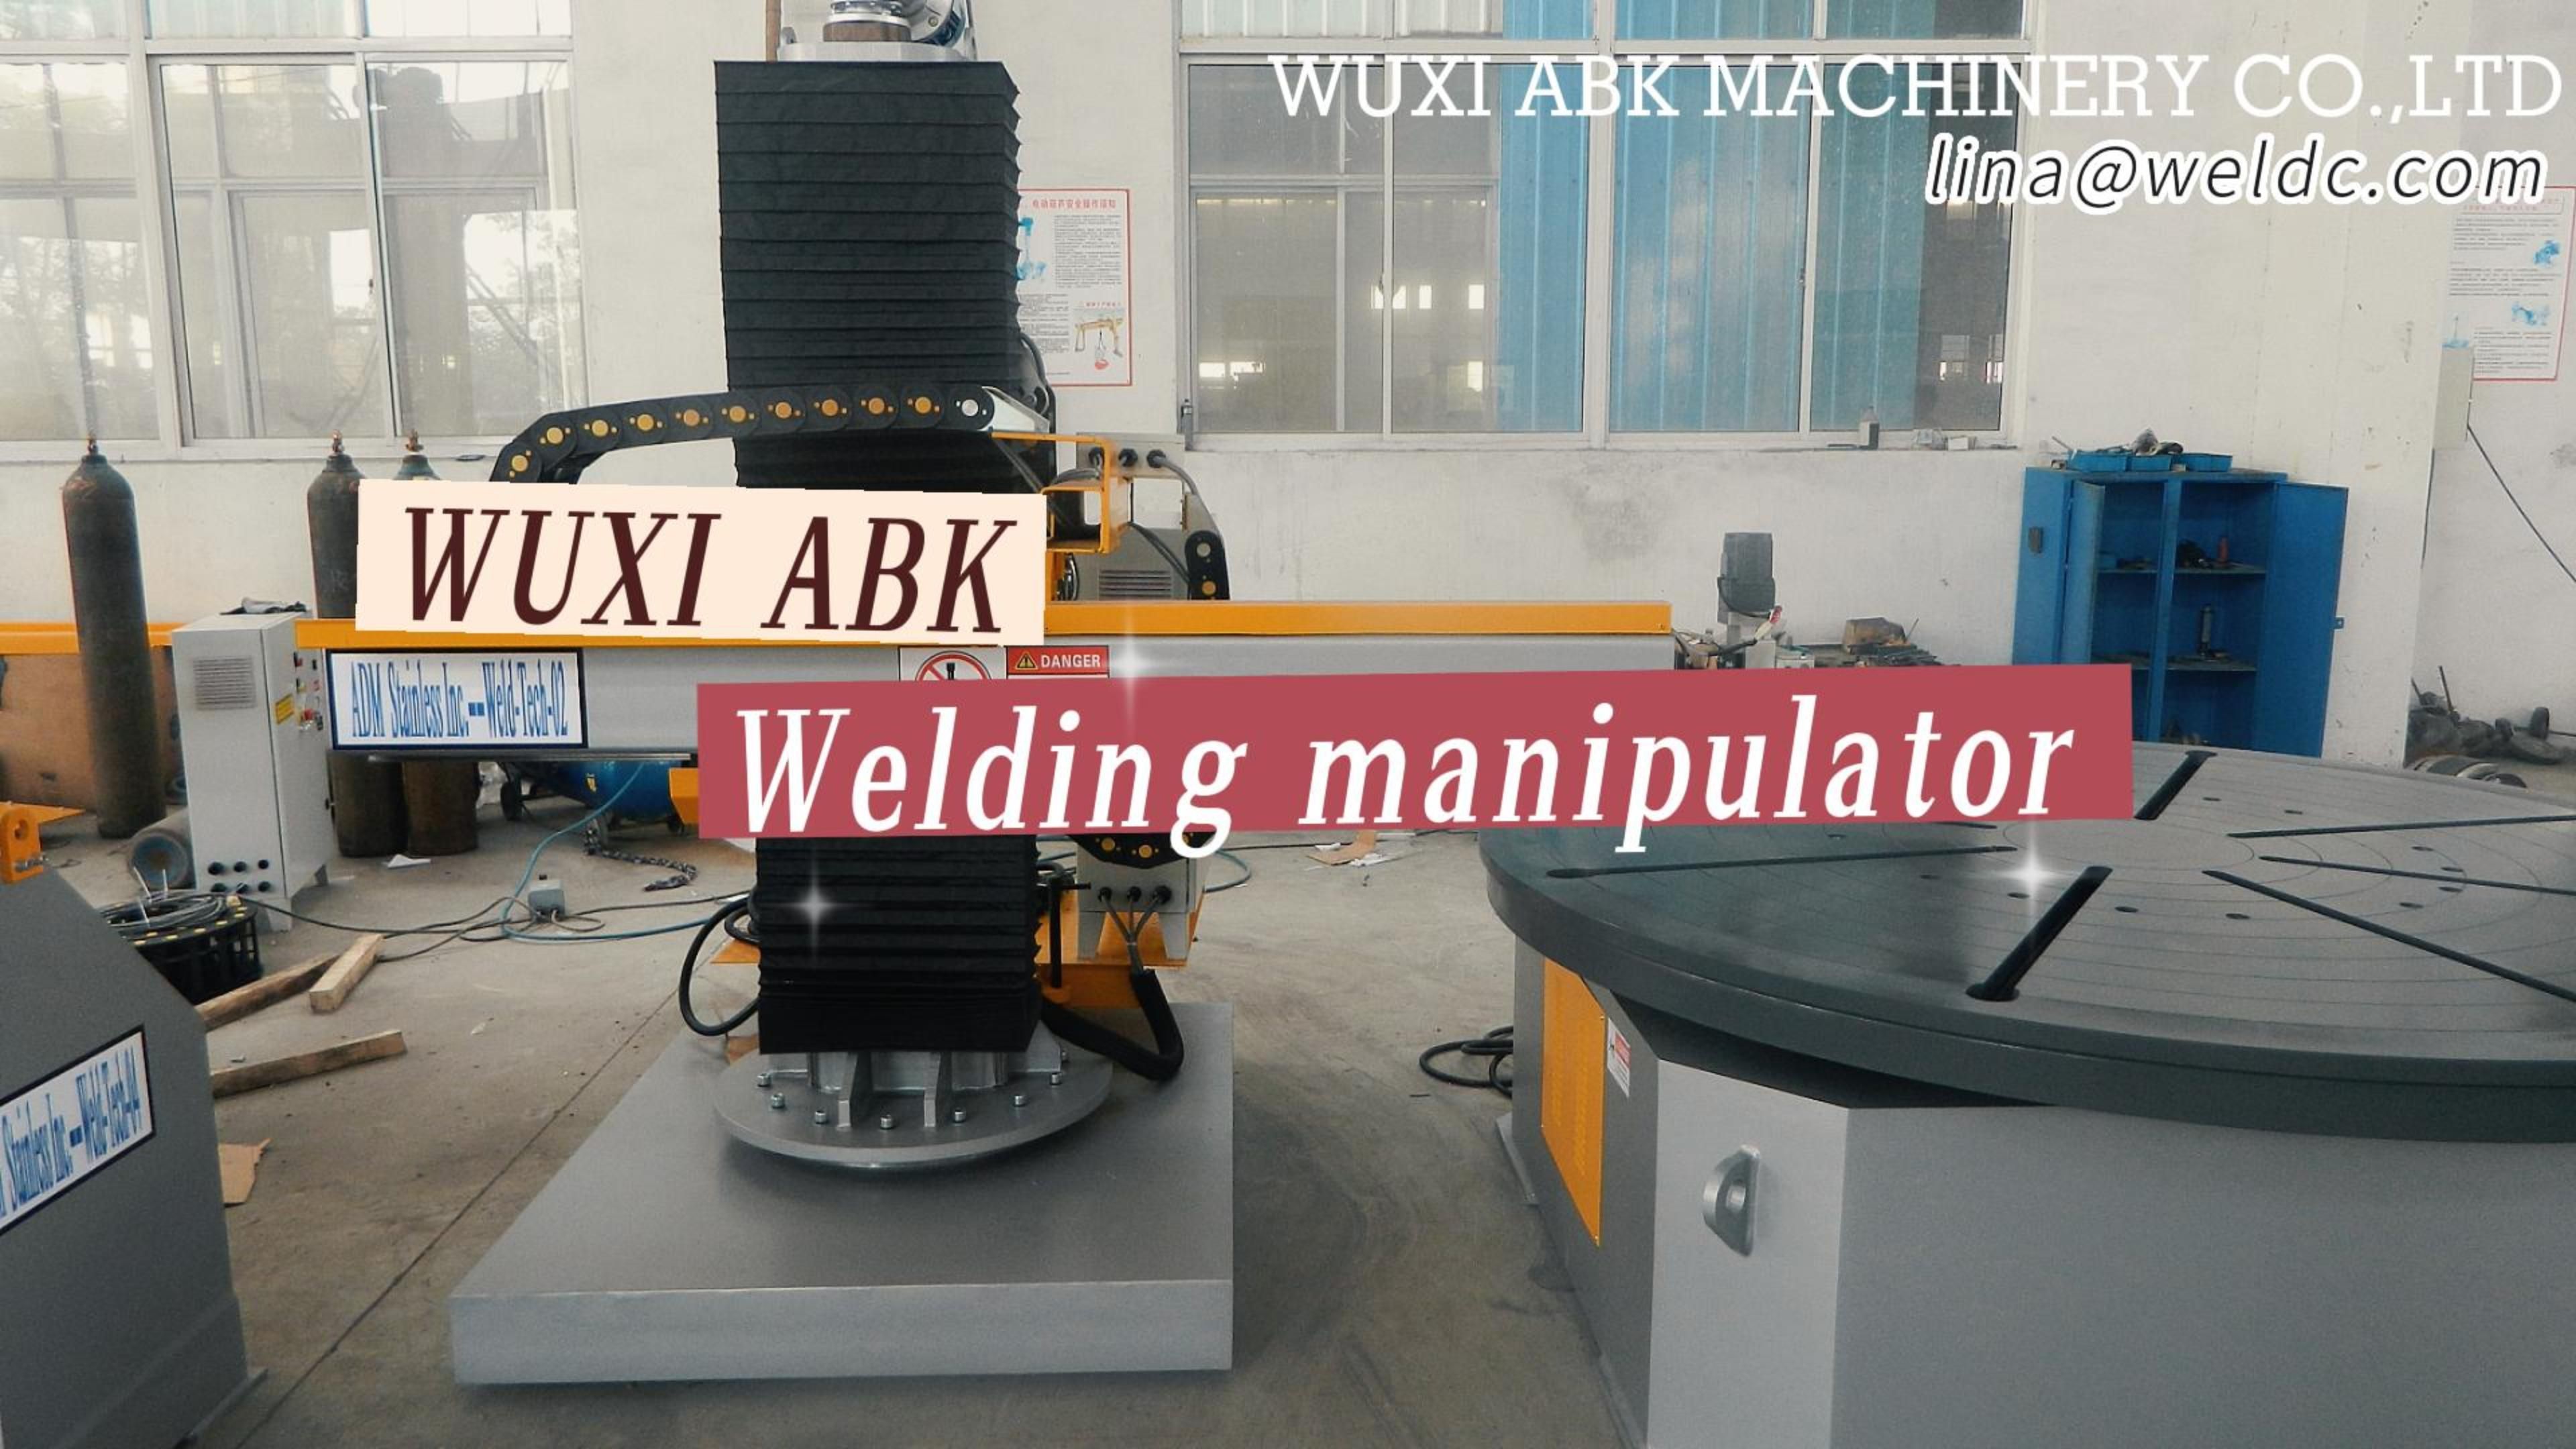 Manufacturers of welding auxiliary equipment: solving the pain points in the industry and realizing efficient technology.